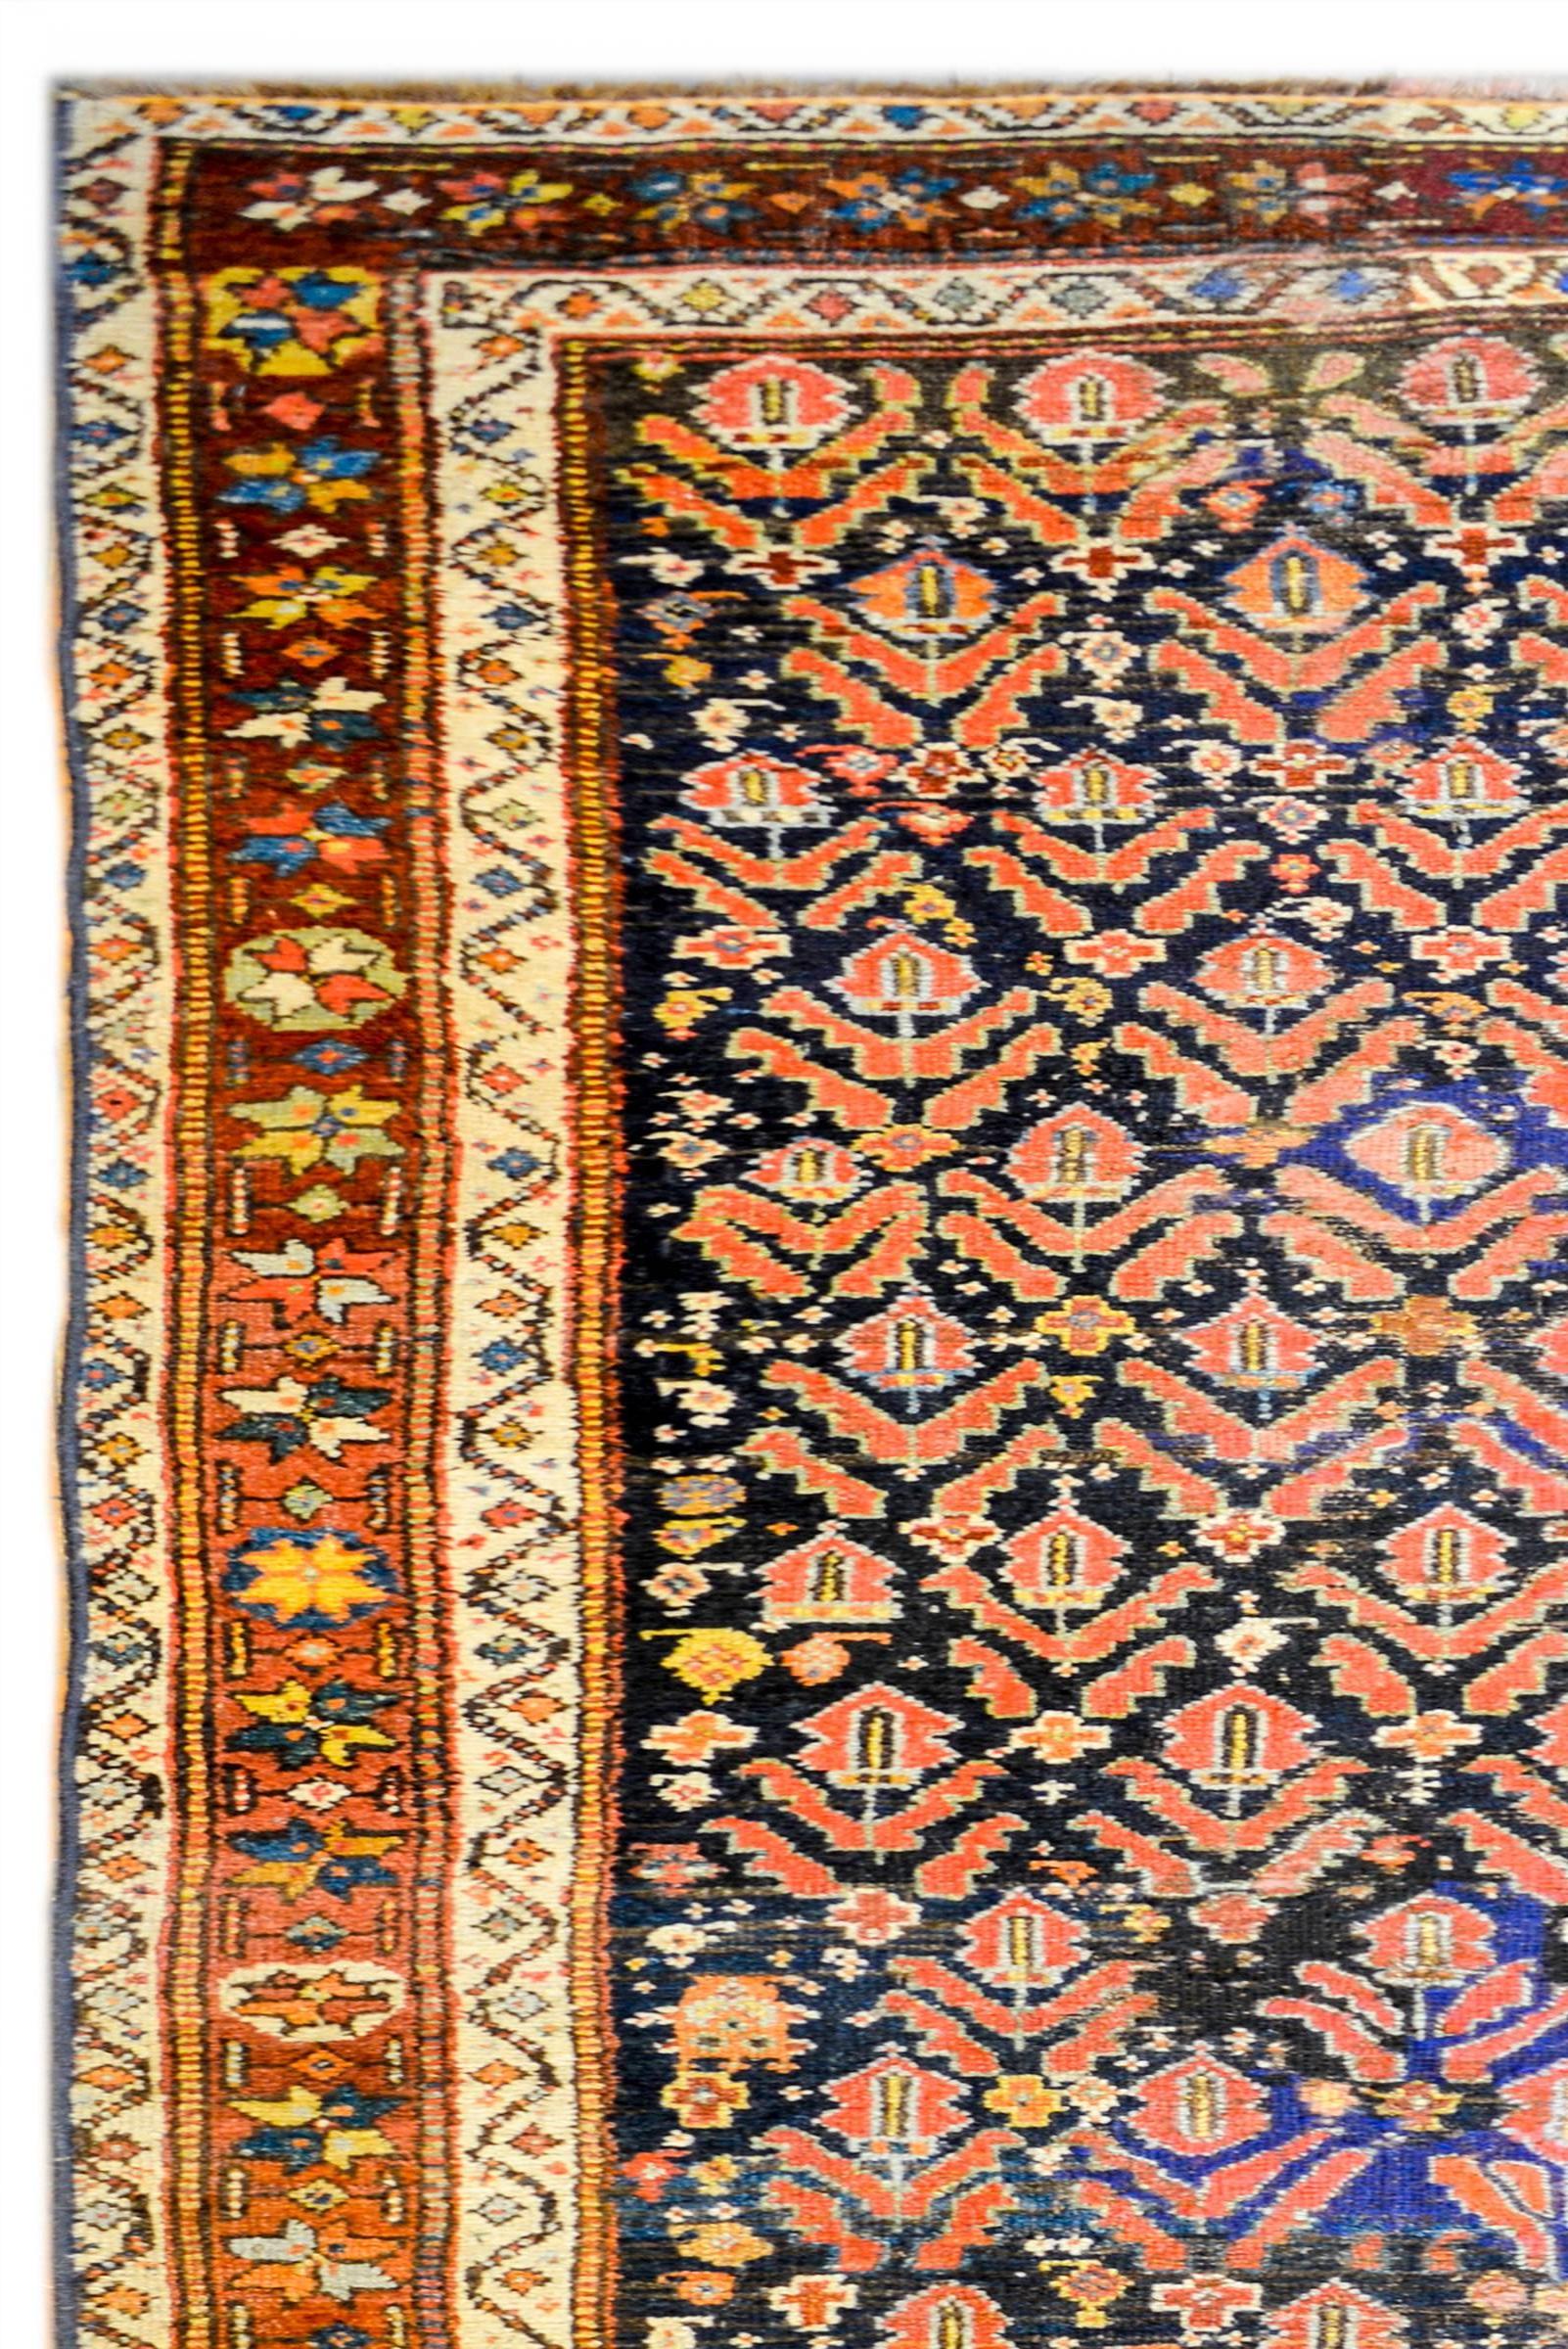 A wonderful early 20th century Kurdish runner with an all-over crimson and indigo tree-of-life pattern on a dark indigo background. The border is complex woven with a stylized floral central stripe flanked by two matching floral patterned stripes.